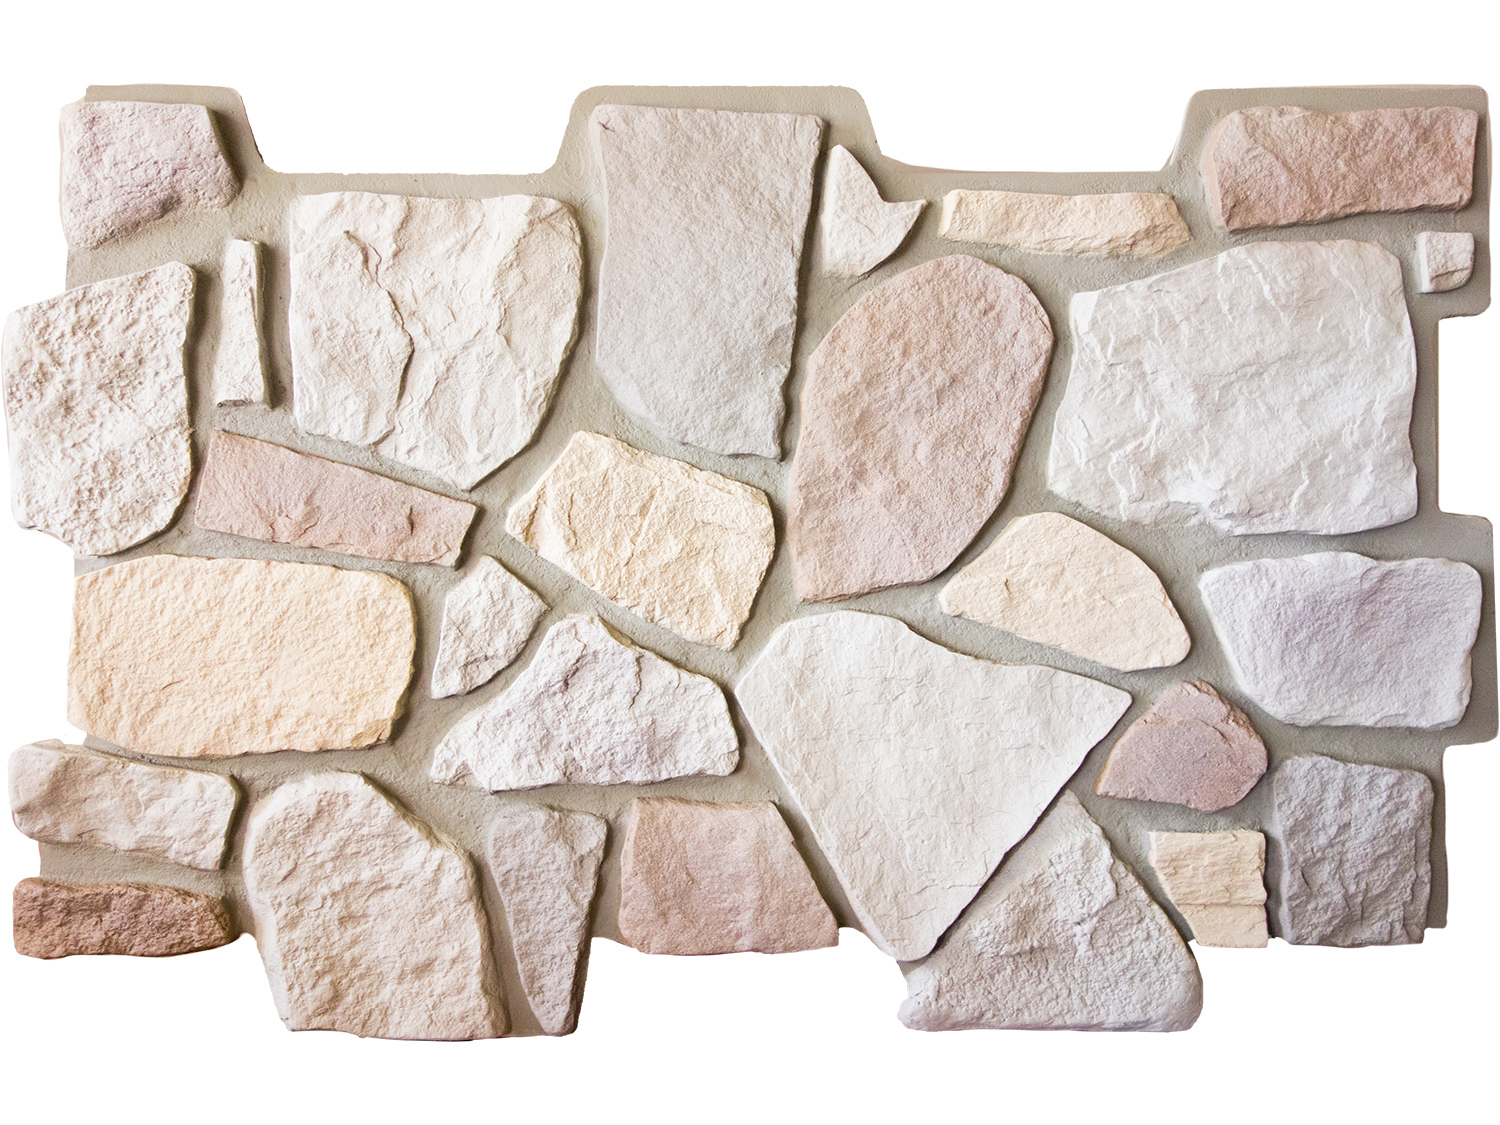 Carlton Fieldstone Stone Wall Panel, How is this installed, what tools is needed to install the panels?